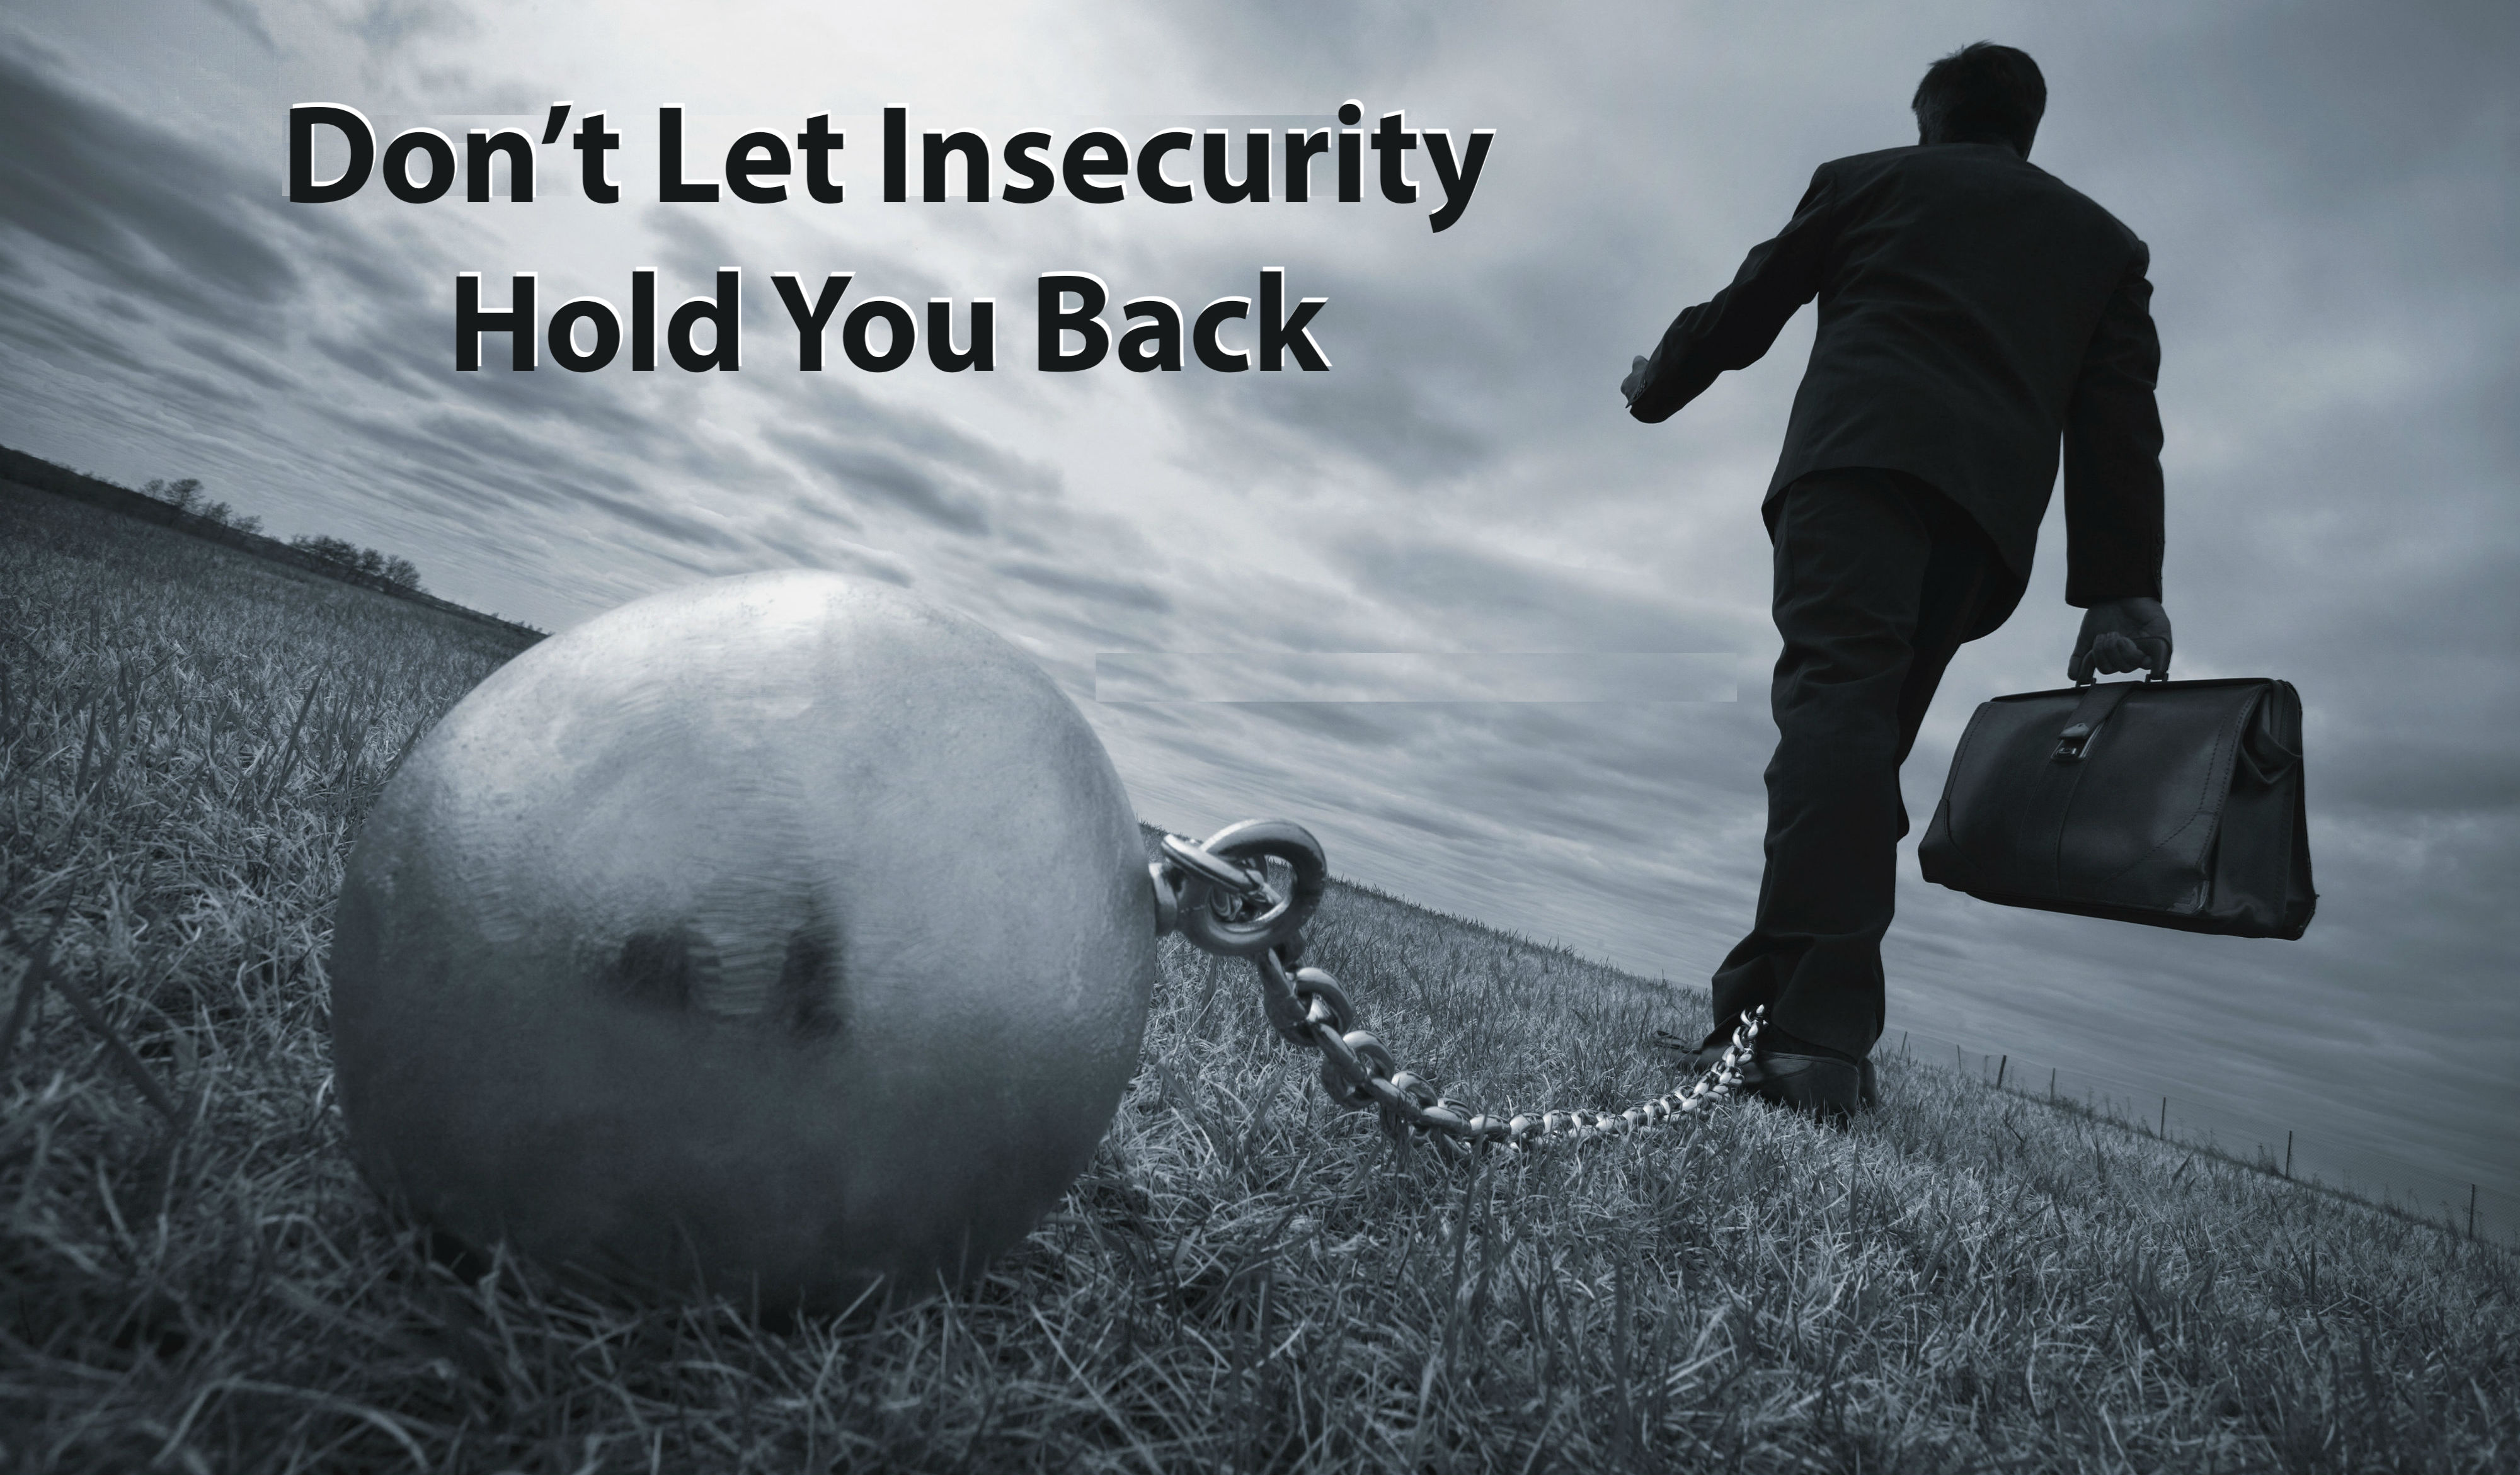 Don’t Let Insecurity Hold You Back